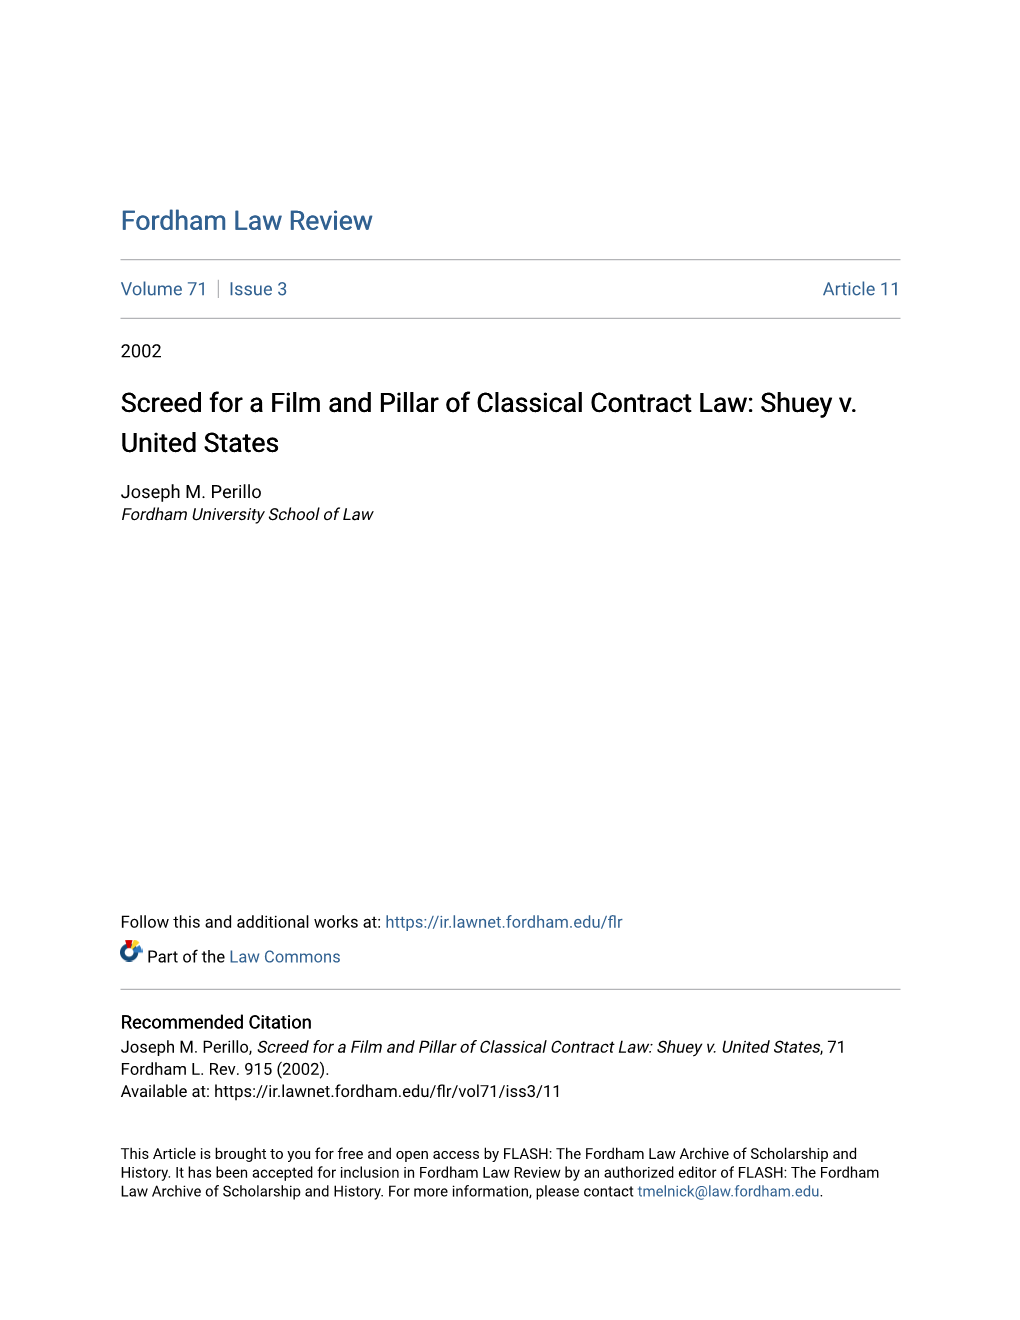 Screed for a Film and Pillar of Classical Contract Law: Shuey V